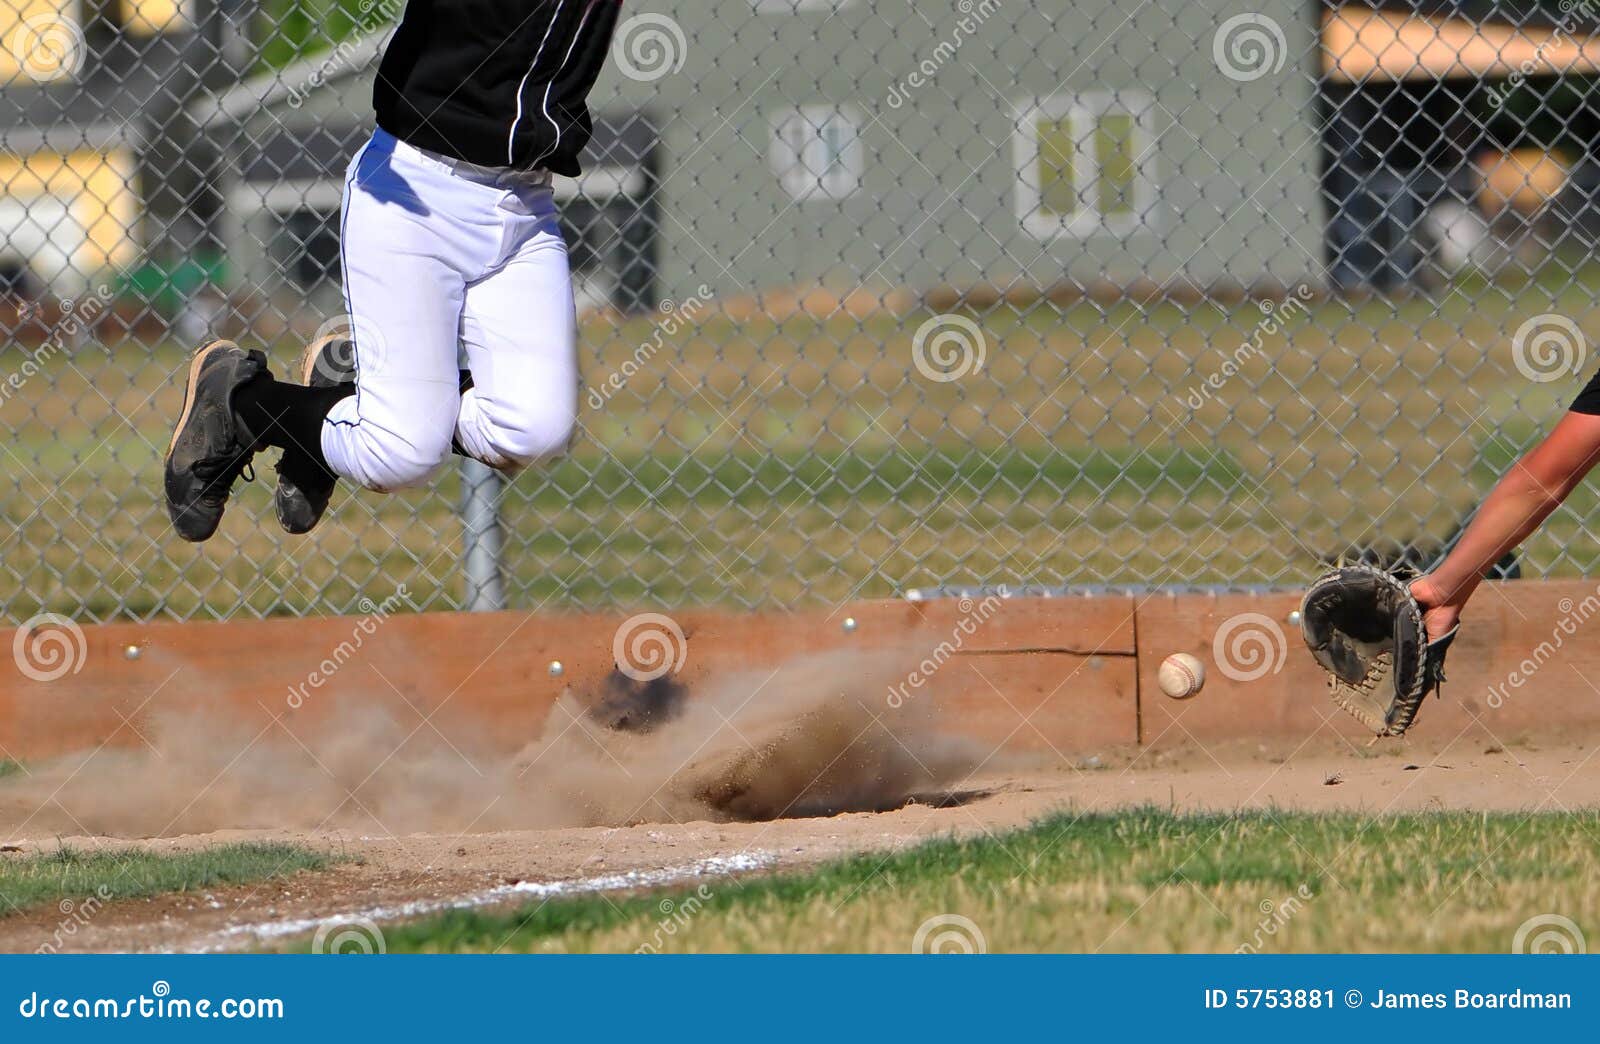 728 Wild Pitch Photos Free Royalty Free Stock Photos From Dreamstime